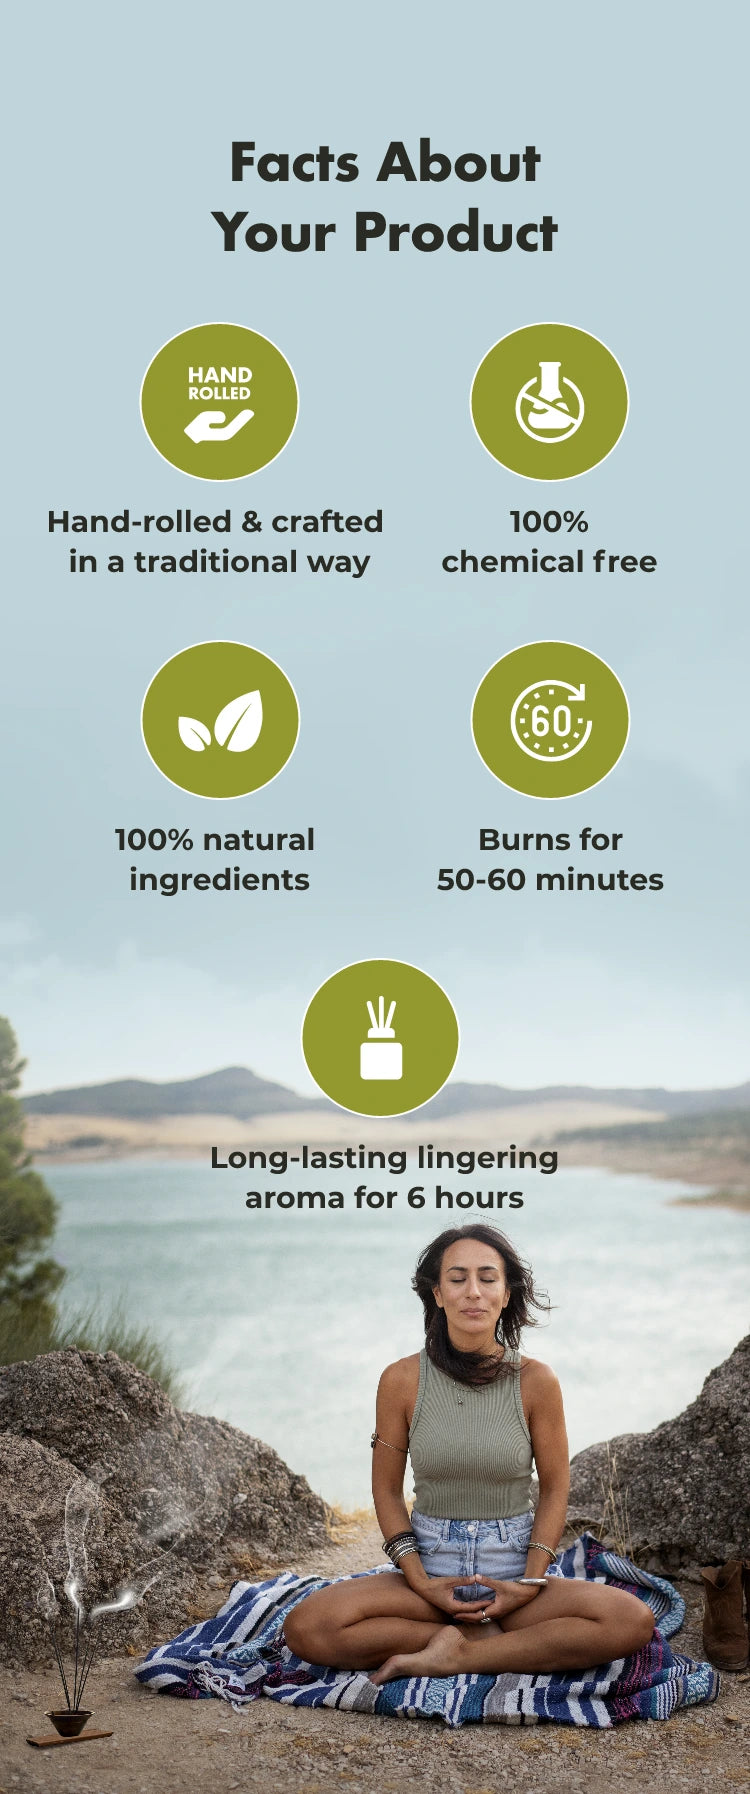 Facts About Your Product
HAND
Hand-rolled & crafted in a traditional way
100%
chemical free
100% natural
ingredients
€60%
Burns for 50-60
minutes
Long-lasting lingering aroma for 6 hours